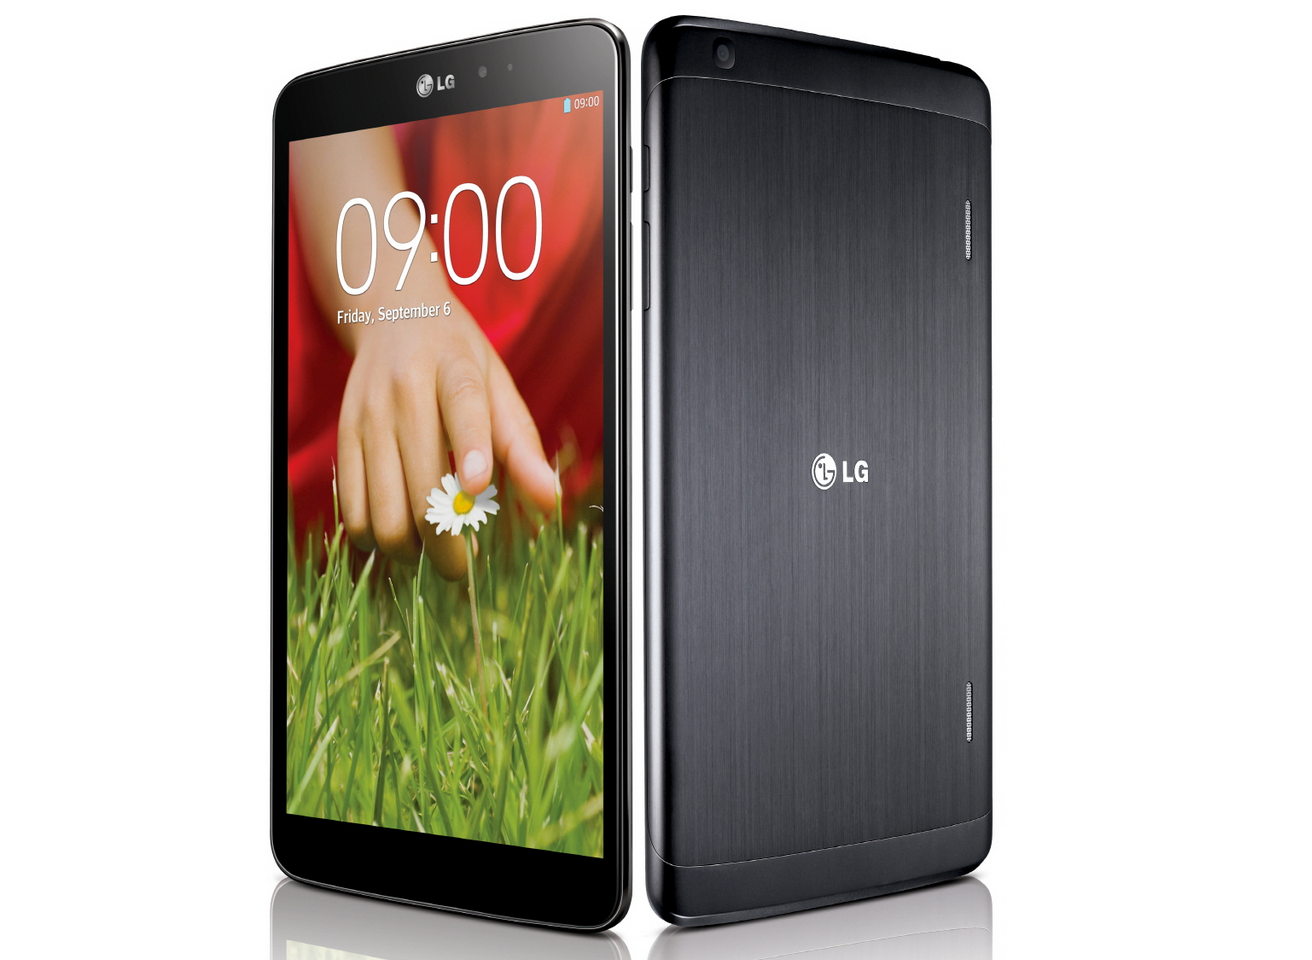 lg g pad 8 3 officially unveiled 8 3 inch full hd display quad core processor and more image 2